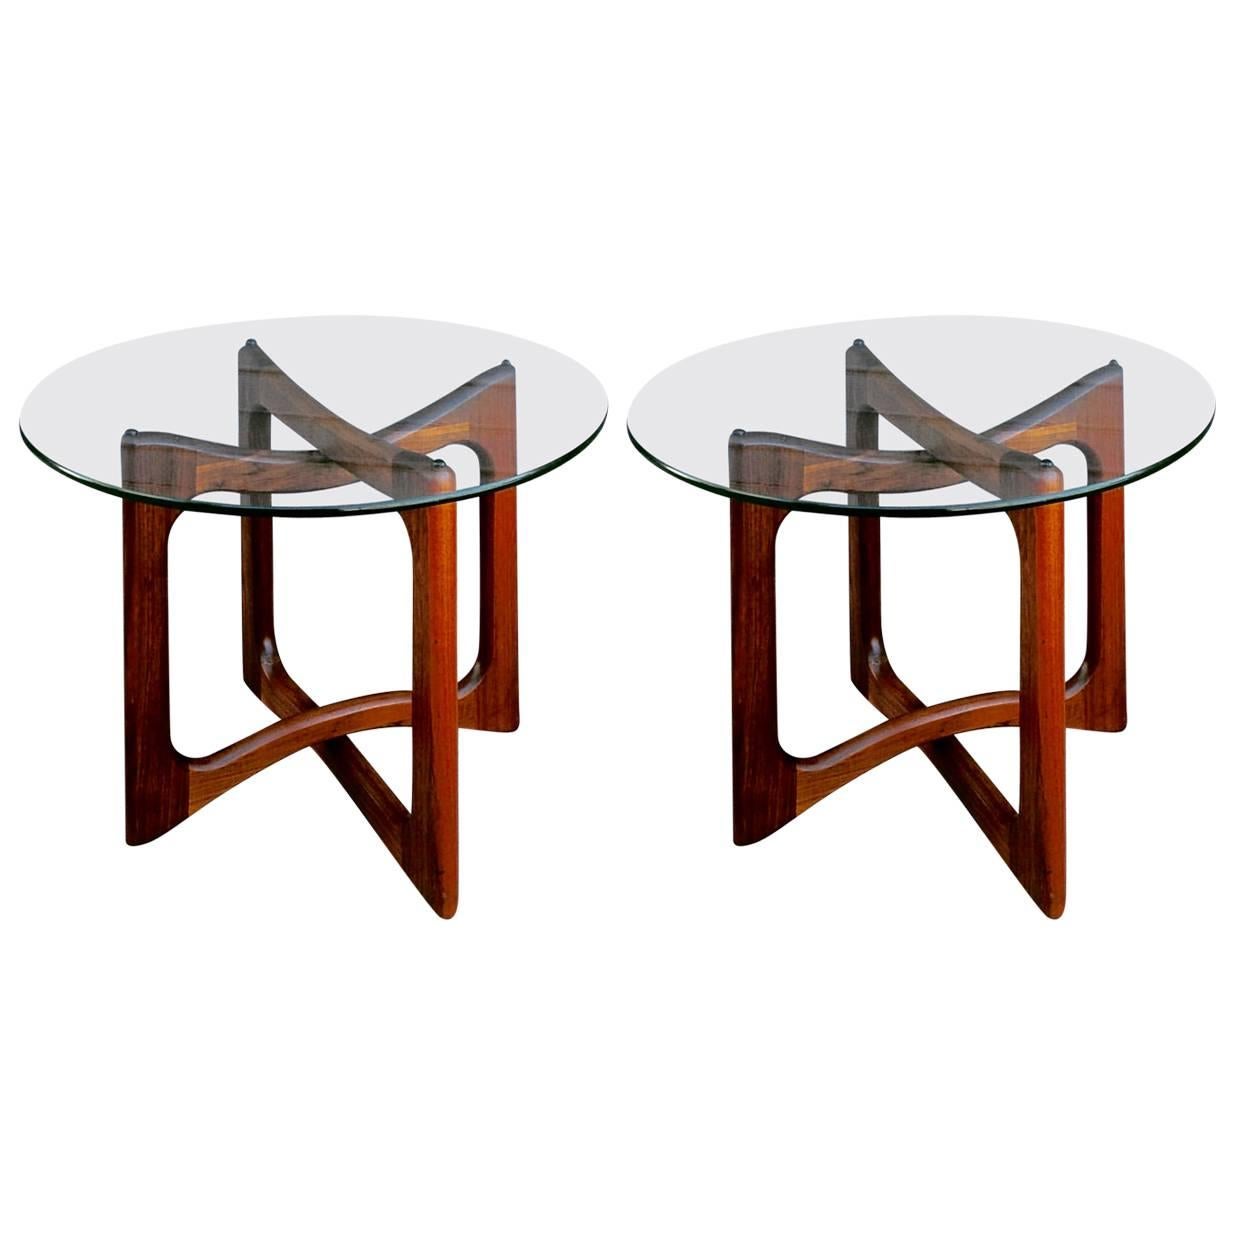 Pair of Walnut and Glass End Tables by Adrian Pearsall